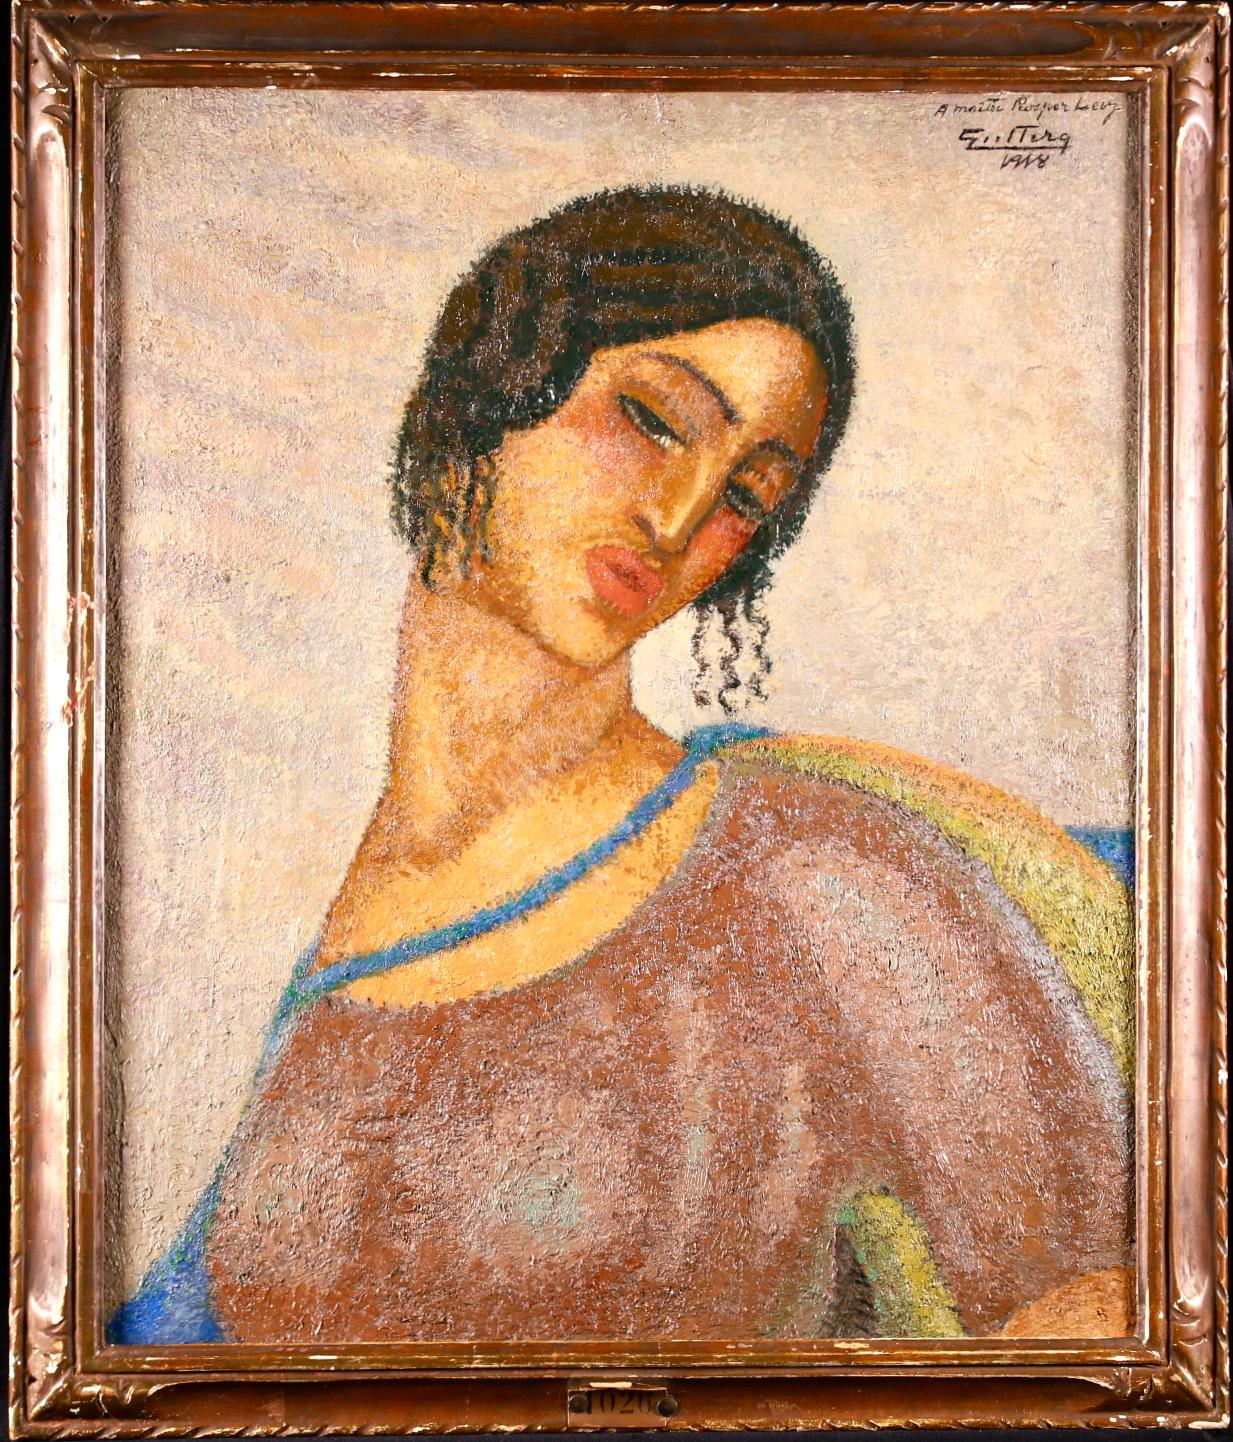 Stunning signed and dated modernist oil on canvas by Argentinian painter Alfredo Guttero. The work depicts a portrait of a young Argentinian woman. It is beautifully and the brush strokes make it almost pointillist like.

This work has come from the